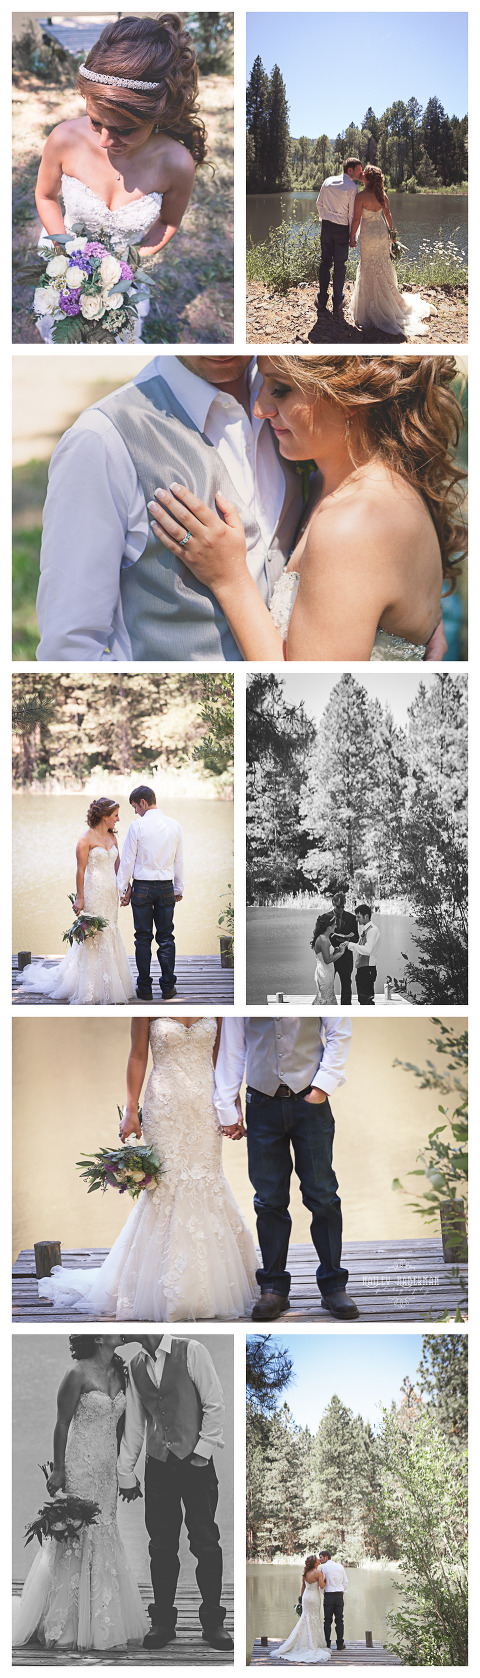 Country Wedding in the Woods with Jeremy & Alexa by Hailey Haberman Cle Elum Photographer